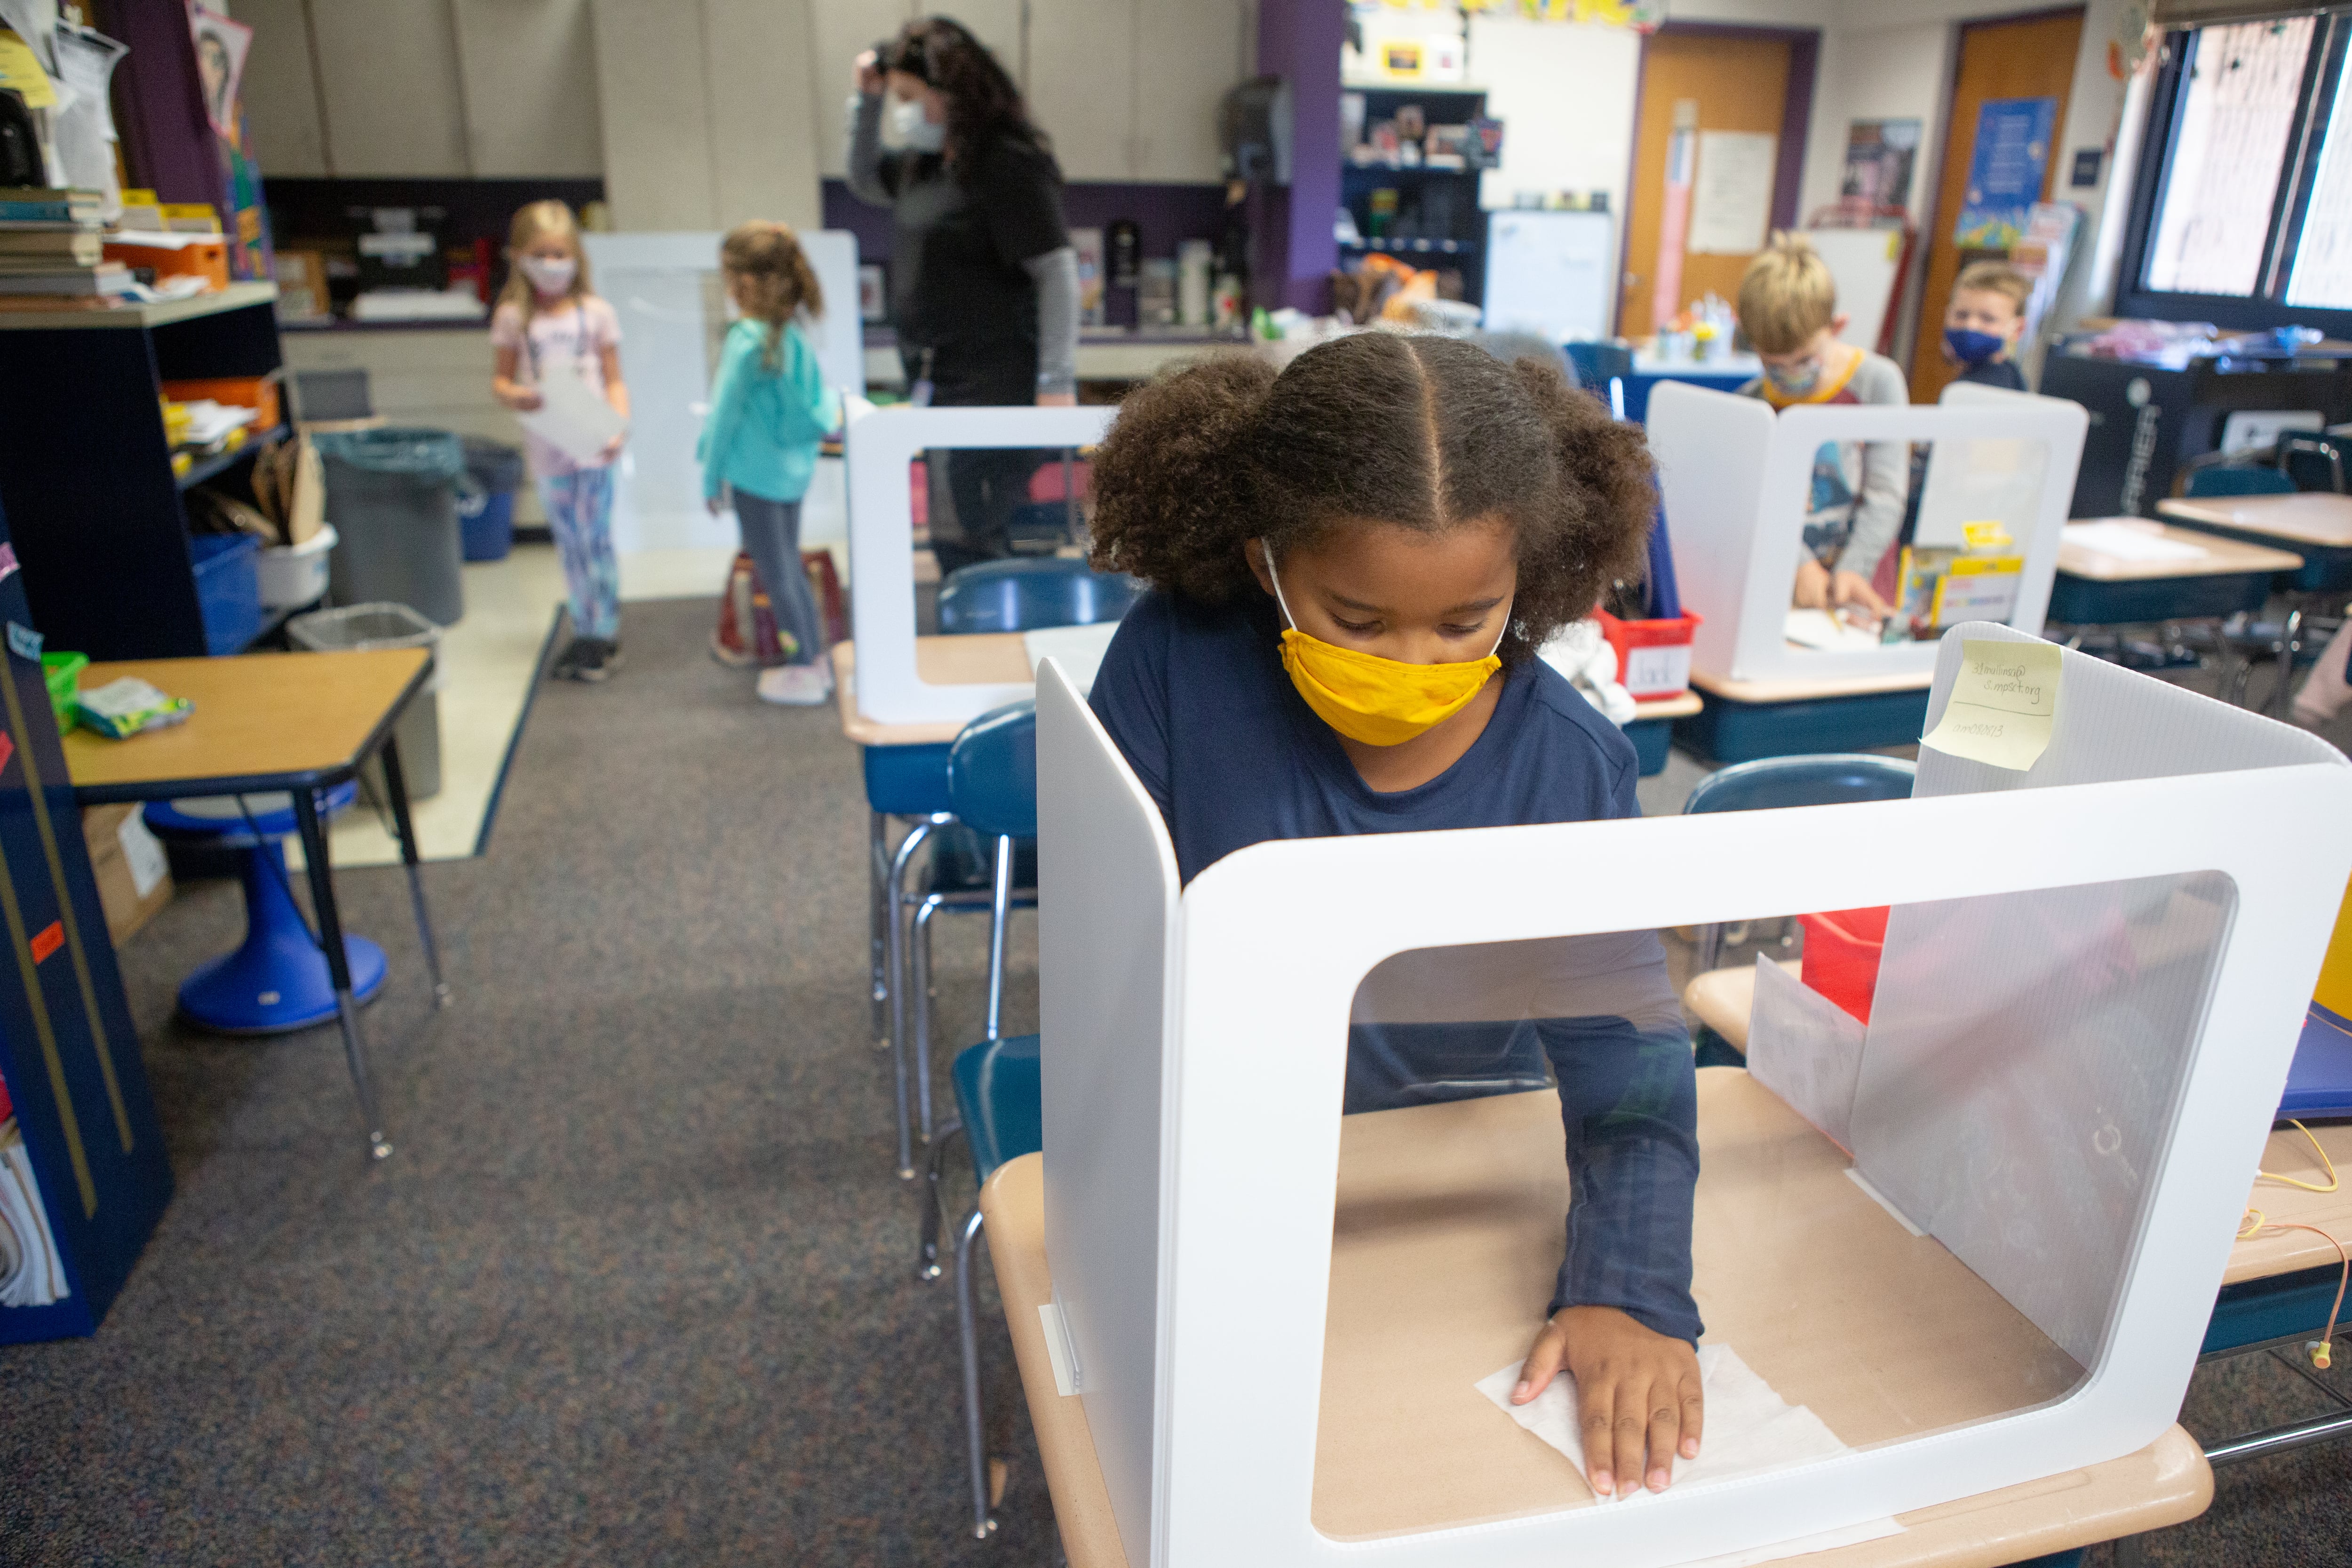 A masked elementary-age student works at a desk with a partition around it, with an adult and two students standing in the aisle in the background, and other students at their desks. All are wearing masks.